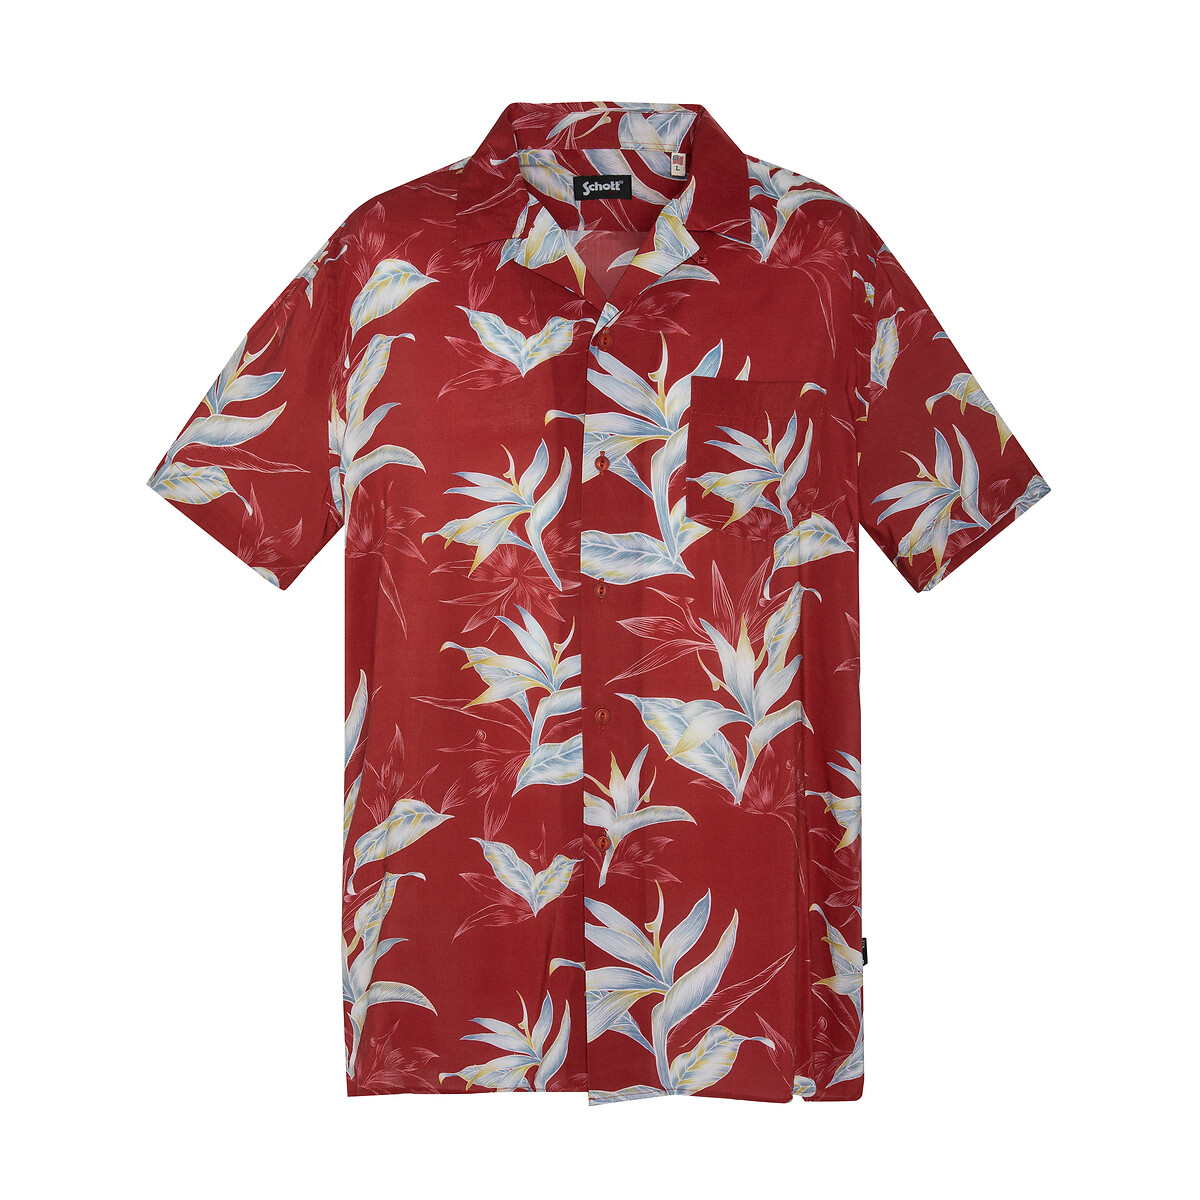 sh rivera shirt with short sleeves and floral print in regular fit